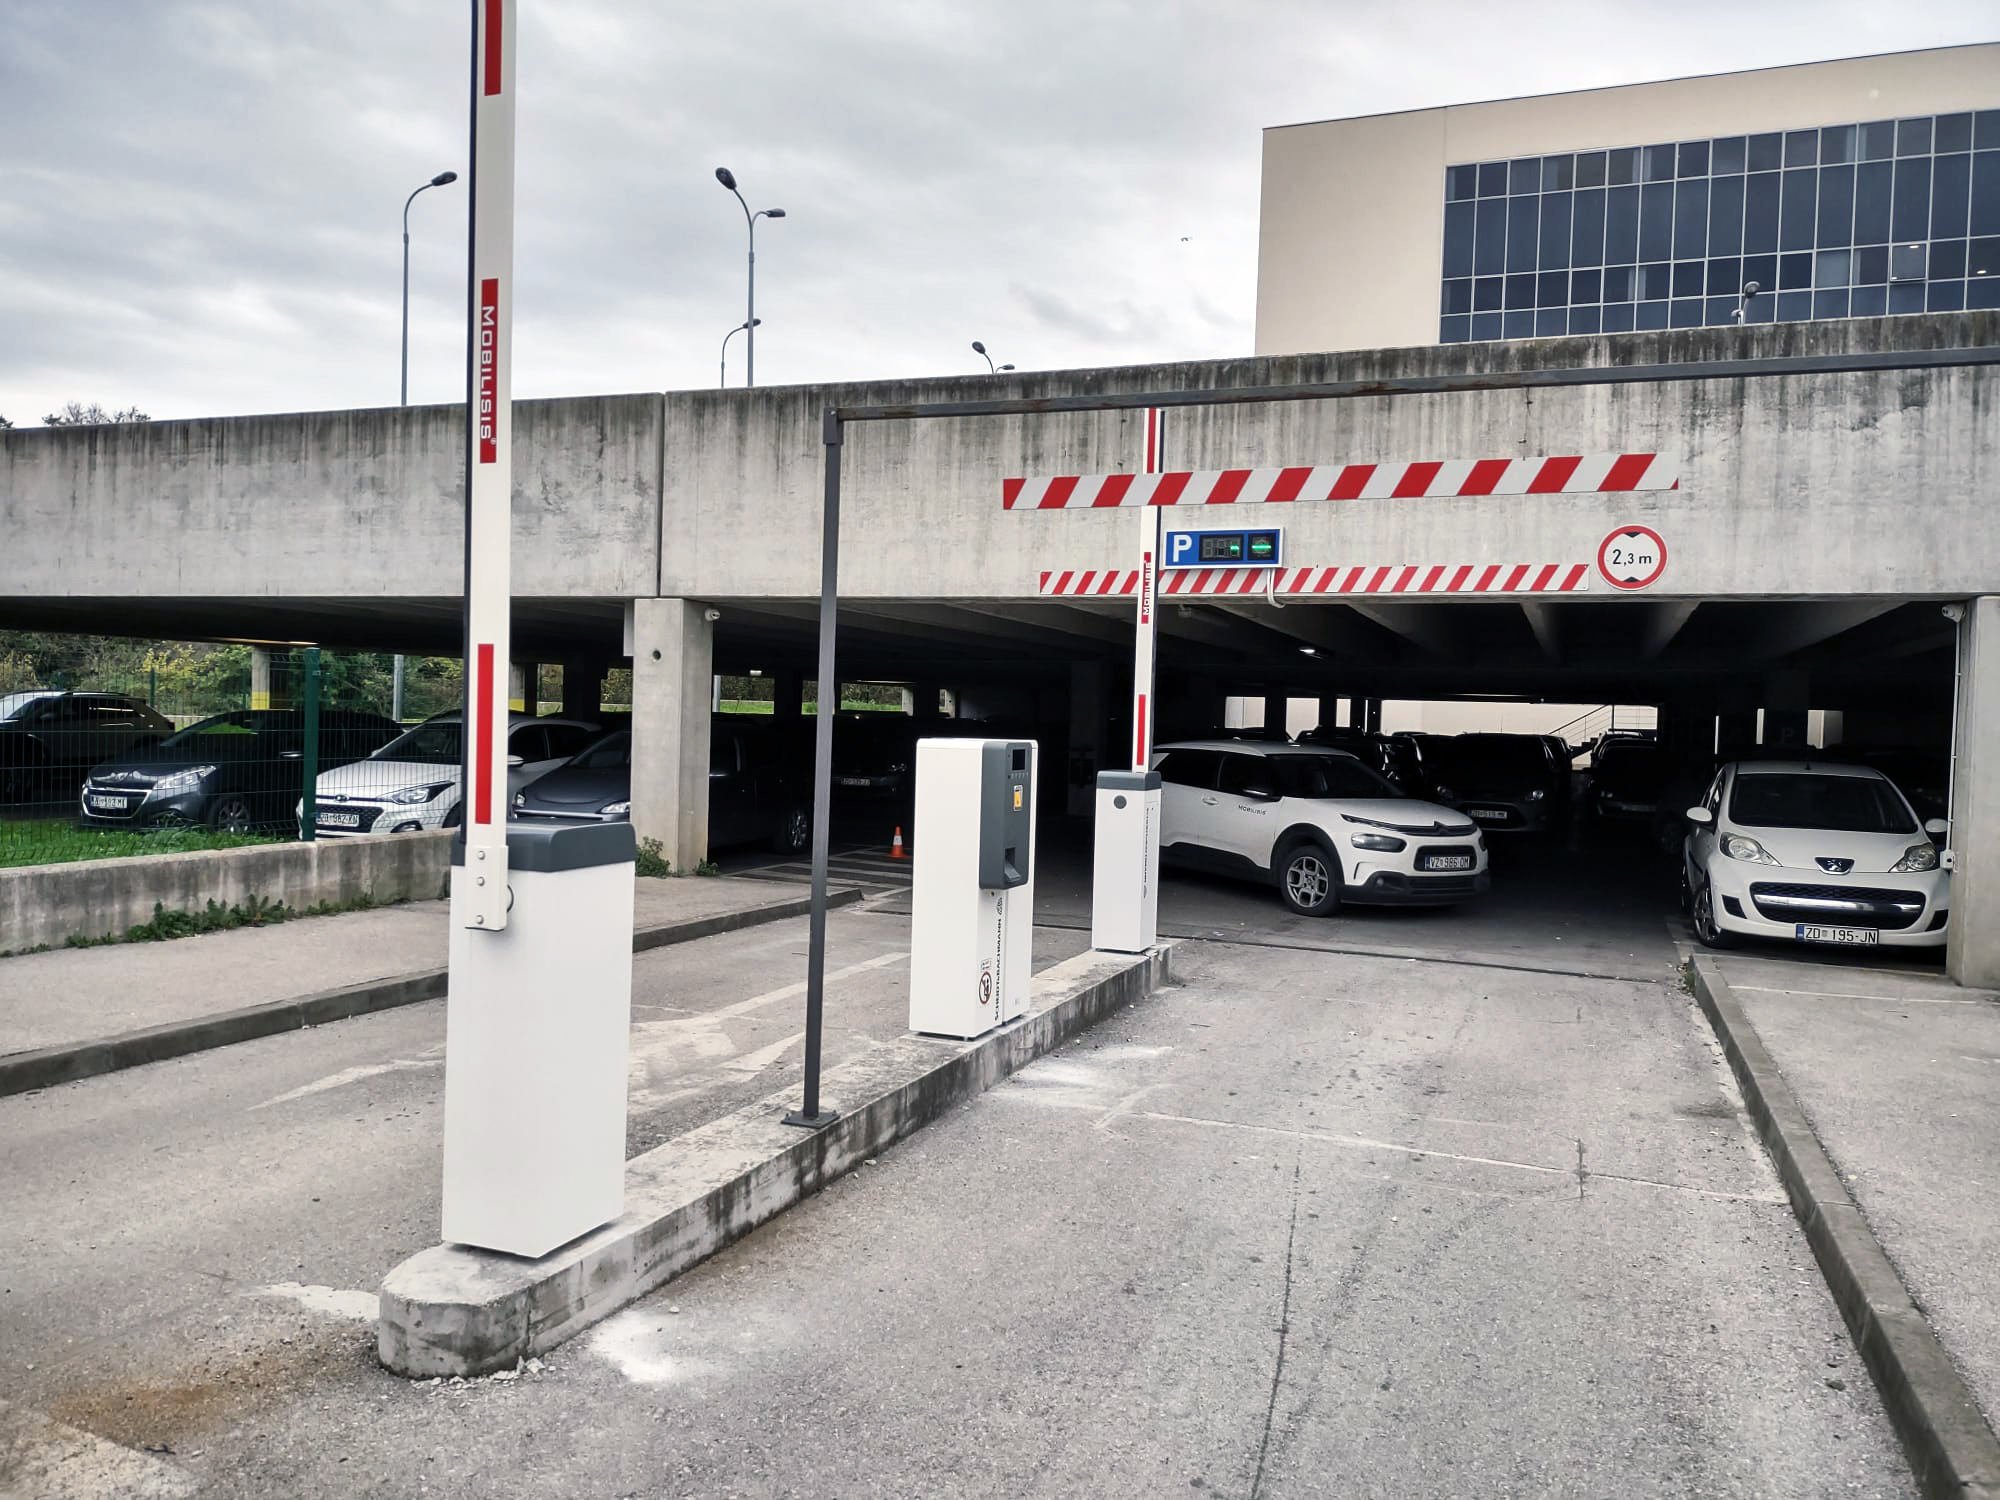 Mobilisis has installed new parking monitoring equipment and a parking fee system